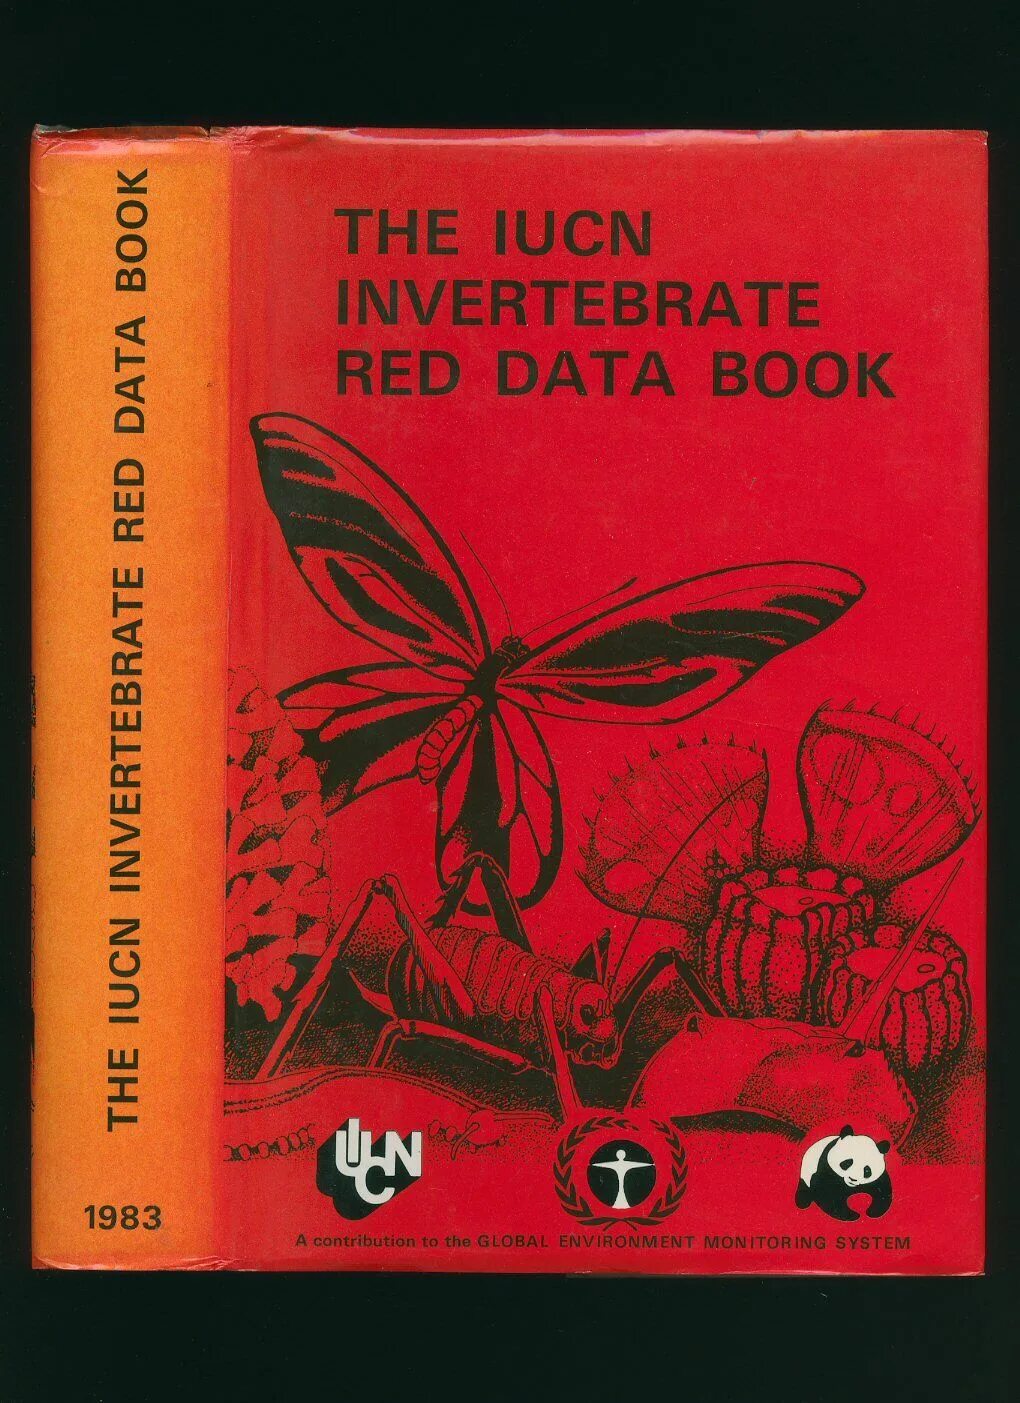 Red data. Red book МСОП 1963. Red data book 1963. Red data book. Red data book IUCN.